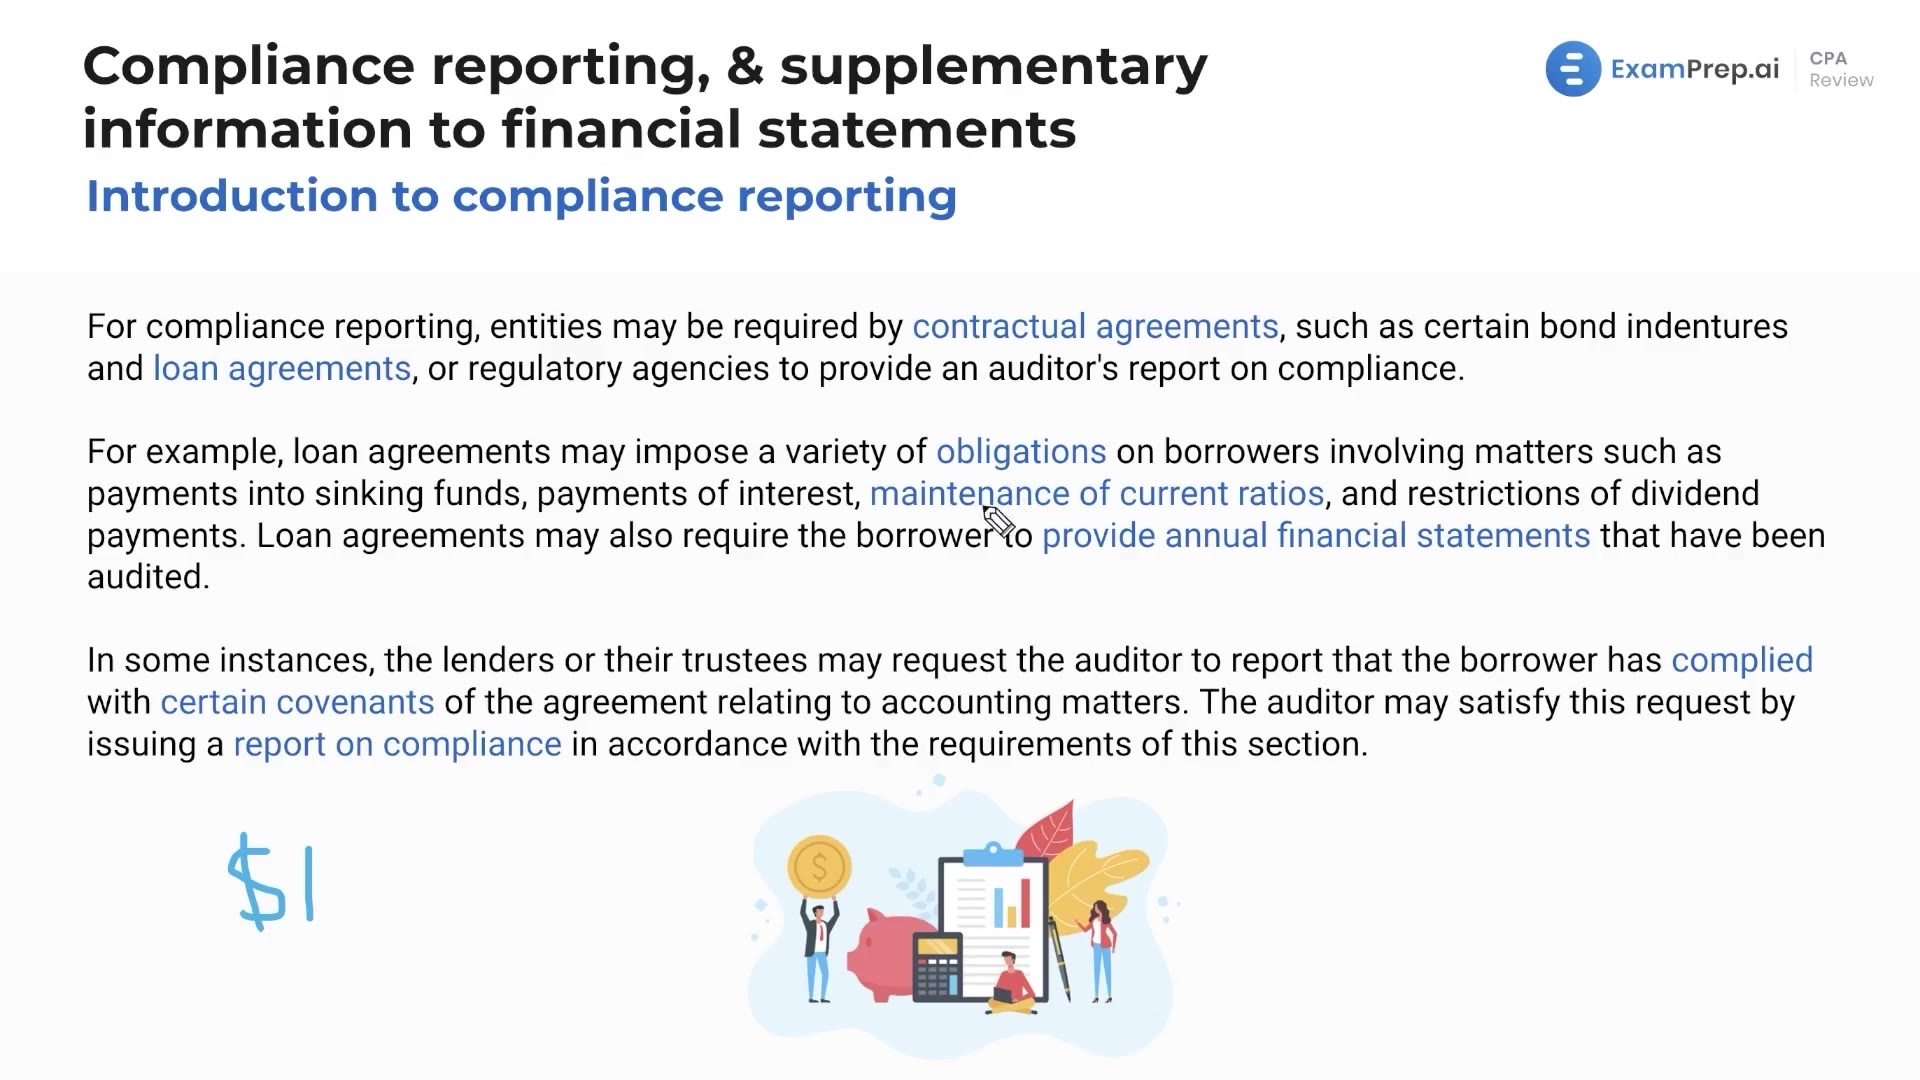 Introduction to Compliance Reporting and Supplementary Information to Financial Statements lesson thumbnail